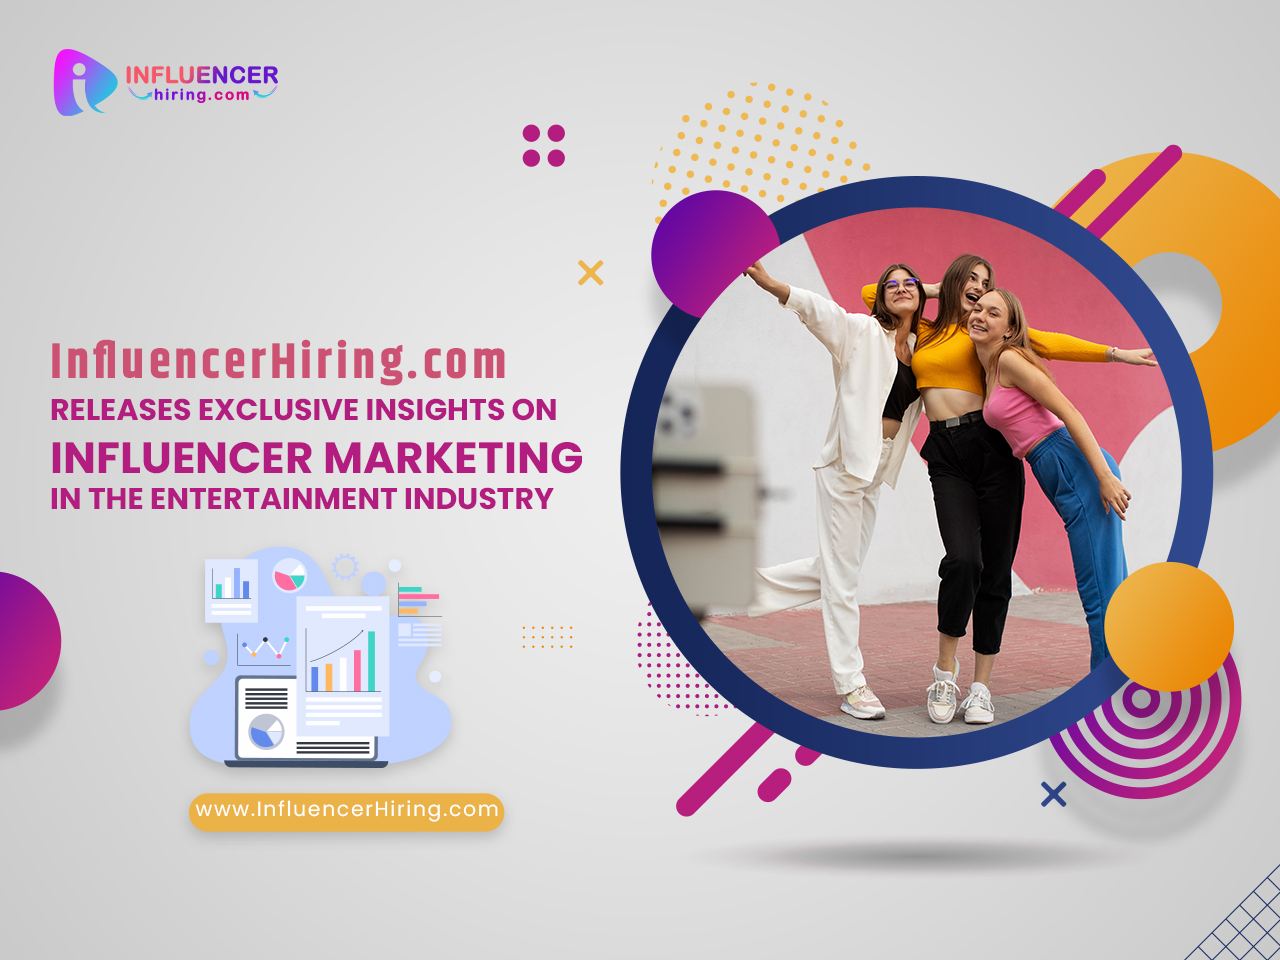 InfluencerHiring.com Releases Exclusive Insights on Influencer Marketing in the Entertainment Industry